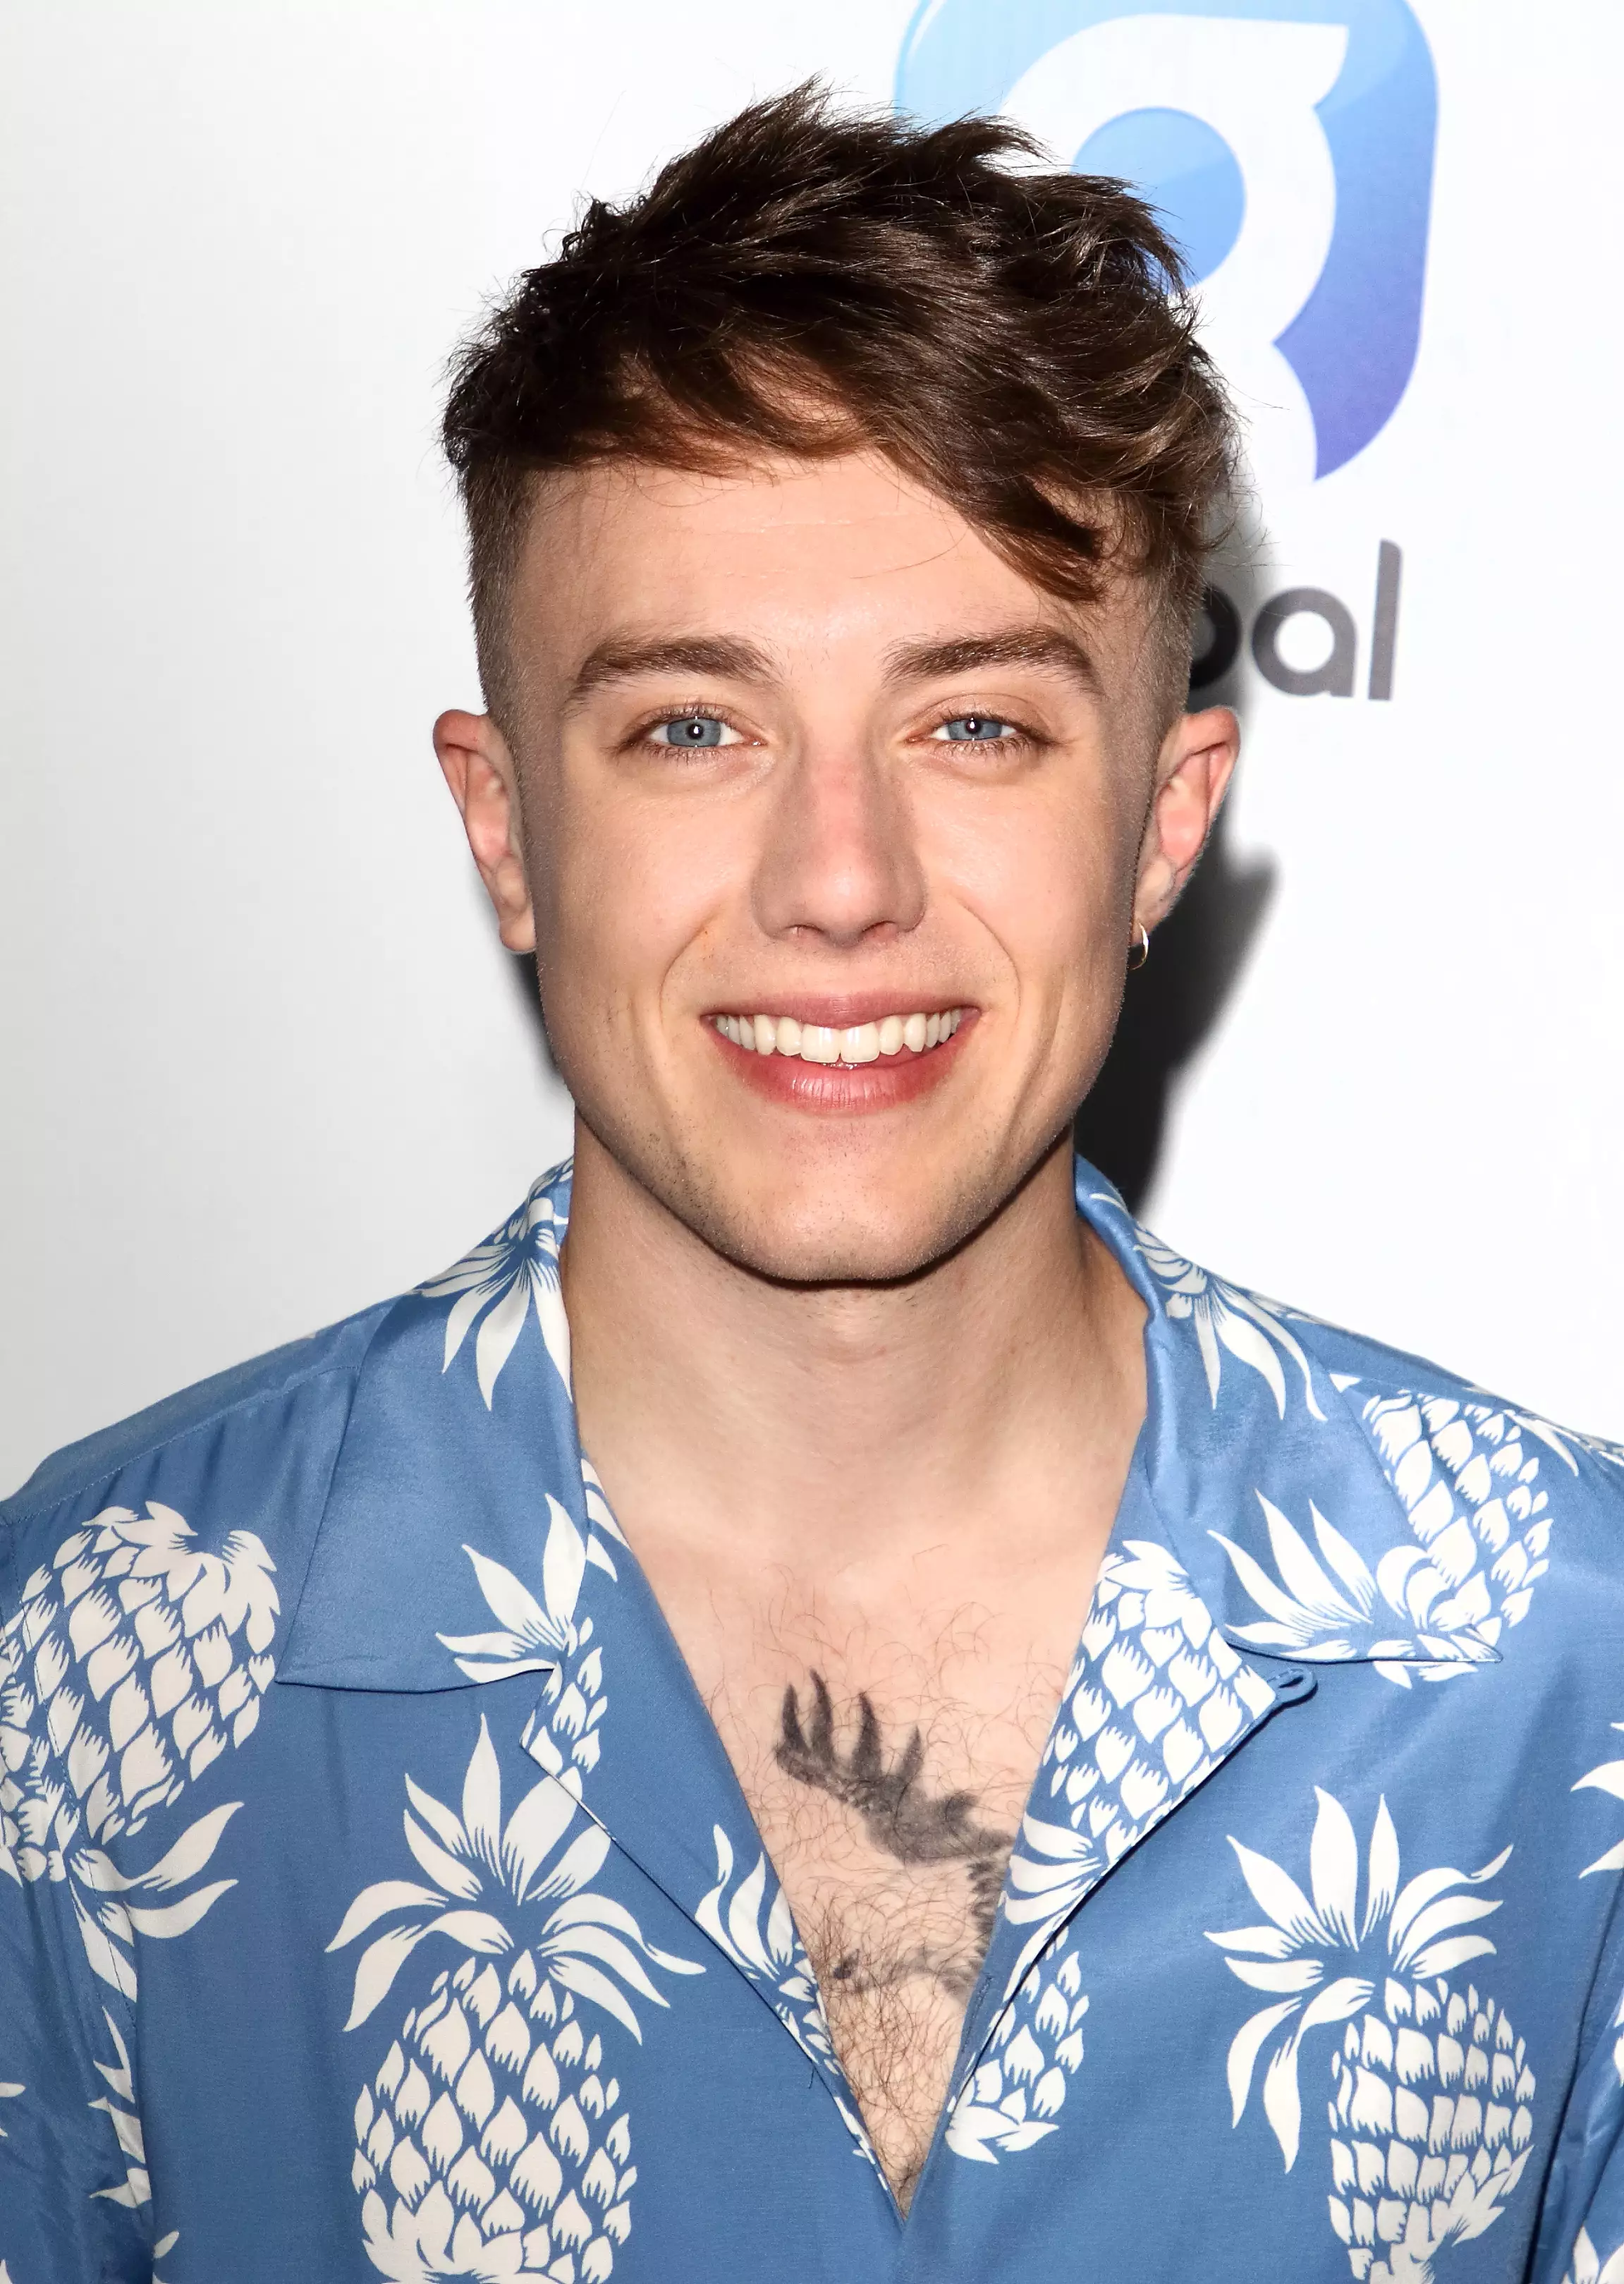 Roman Kemp is rumoured to be going into this year's I'm A Celebrity... Get Me Out Of Here!